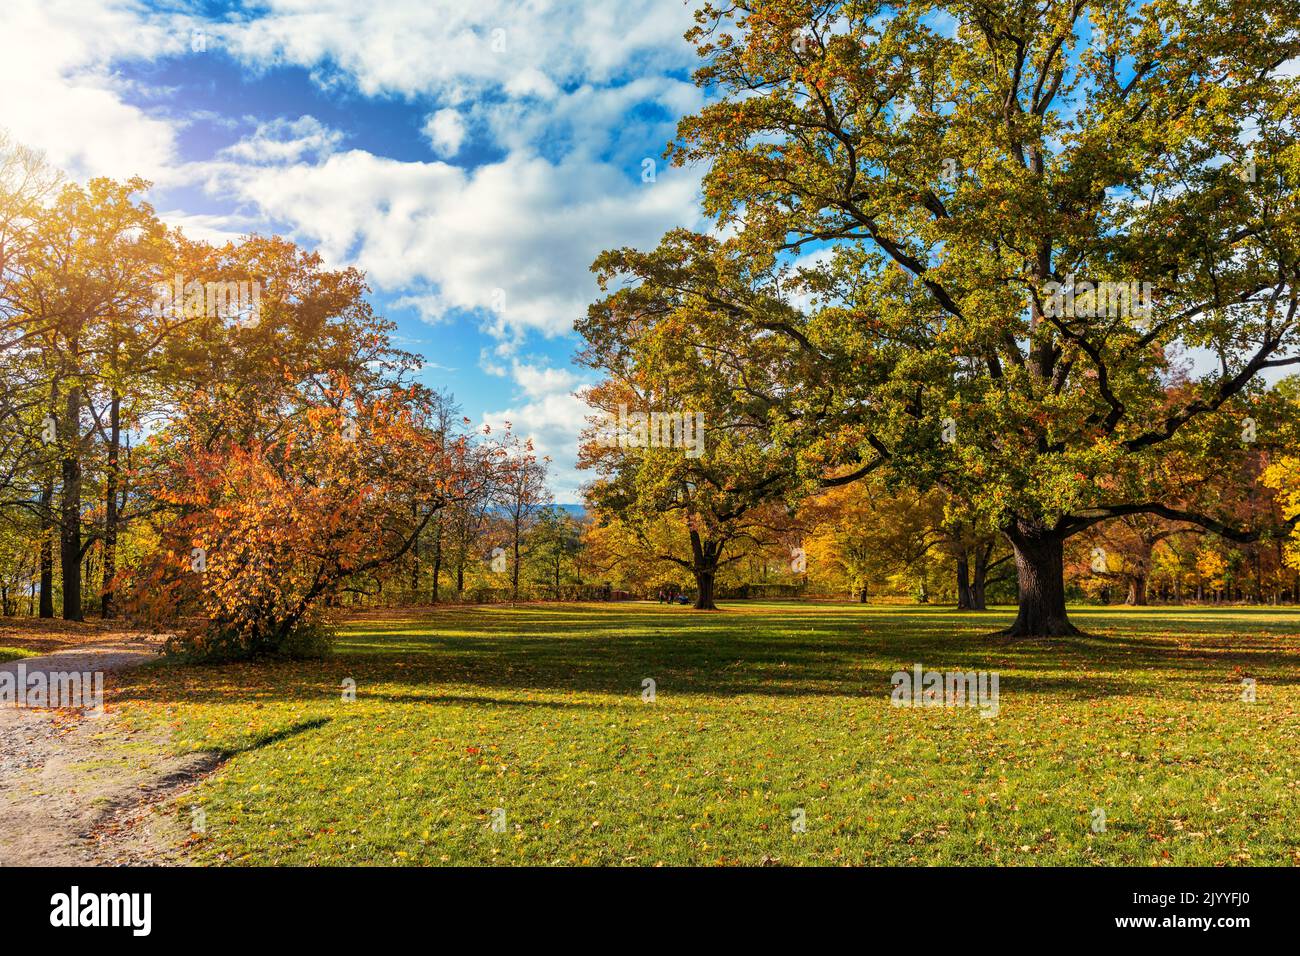 Golden autumn scene in a park, with falling leaves, the sun shining through the trees and blue sky. Colorful foliage in the park, falling leaves natur Stock Photo